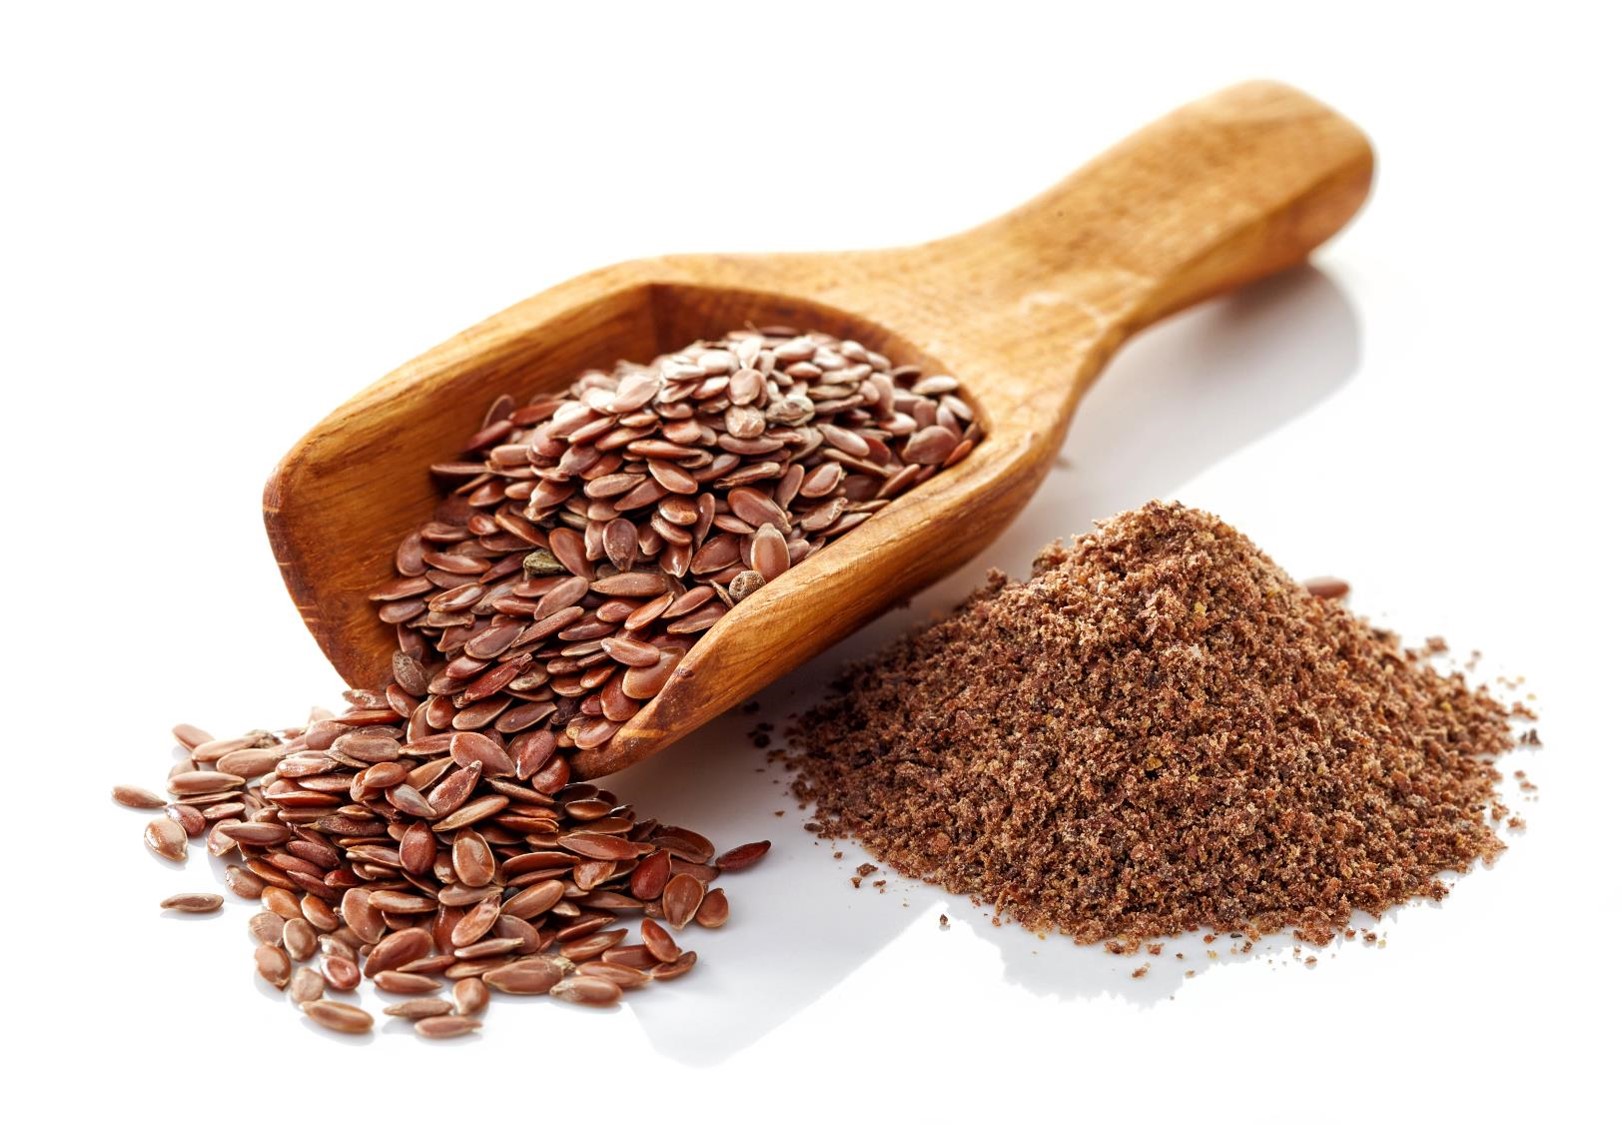 FIND OUT MORE ABOUT FLAXSEED